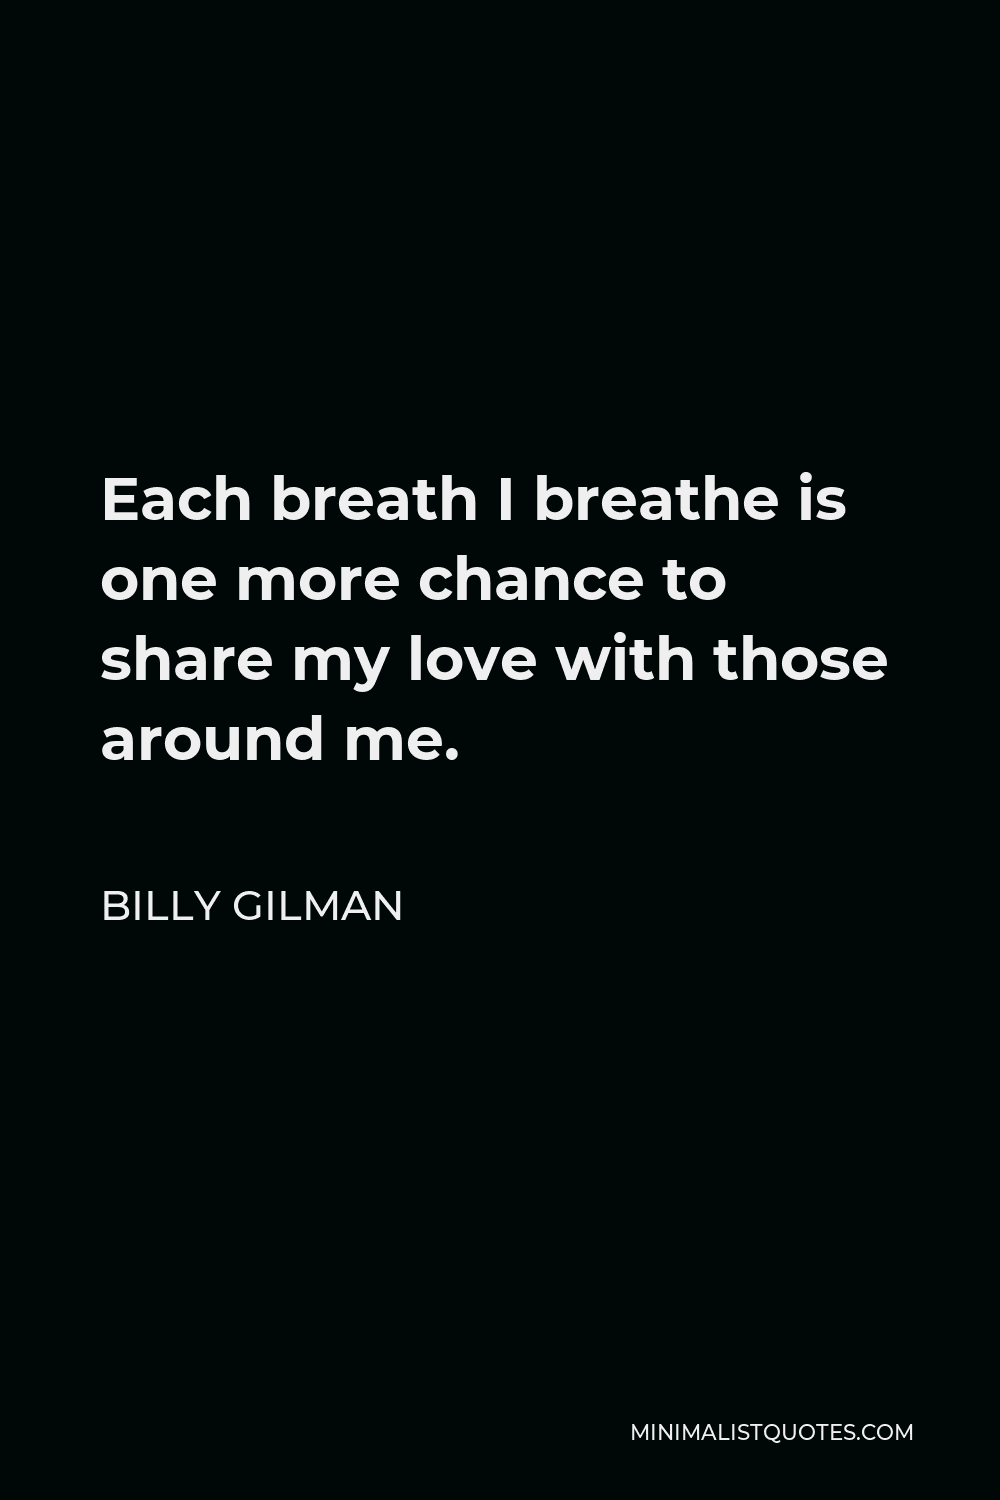 Billy Gilman Quote - Each breath I breathe is one more chance to share my love with those around me.